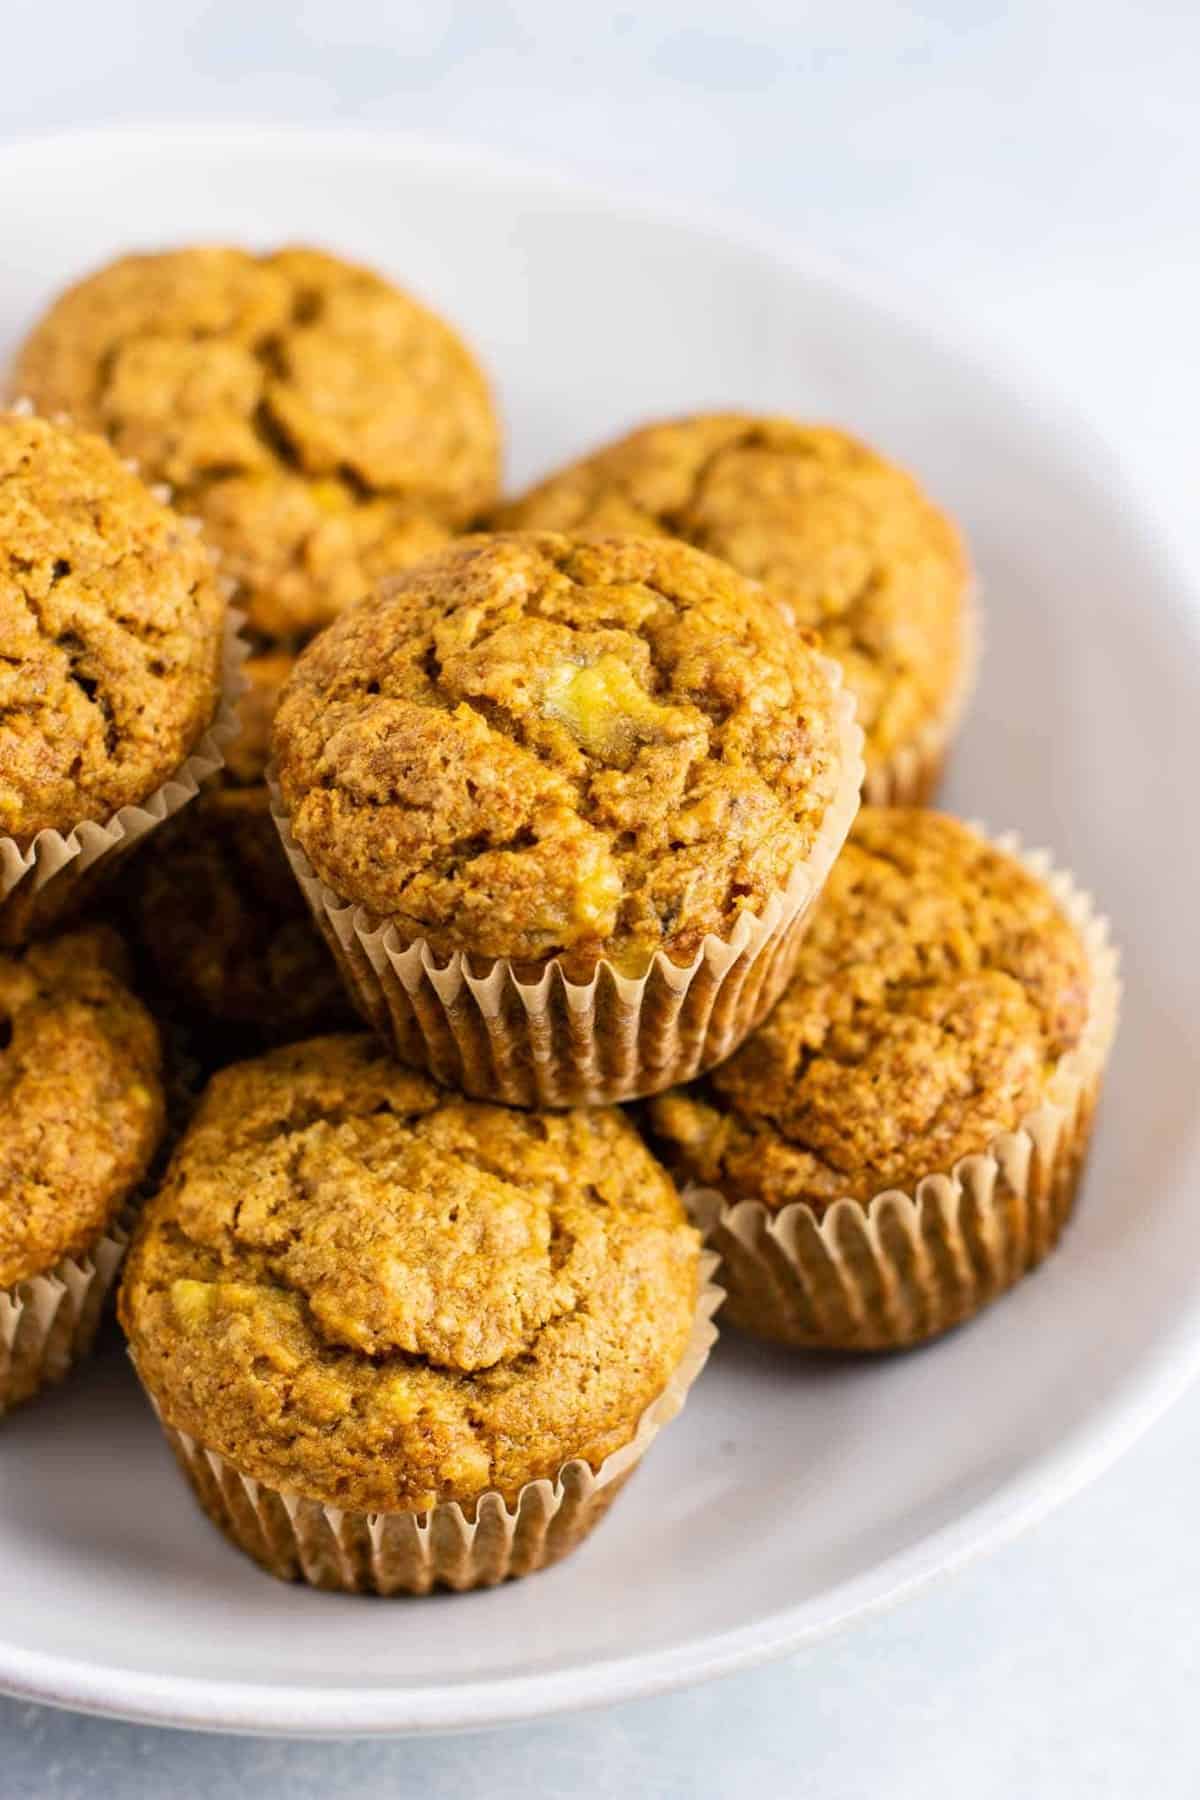 Healthy and easy vegan banana muffins recipe with applesauce – these are amazing and totally oil free! No flax eggs or difficult ingredients. So easy and a great vegan breakfast or snack. #veganbananamuffins #veganbreakfast #vegan #breakfast #healthymuffins #healthybananamuffins #veganmuffins